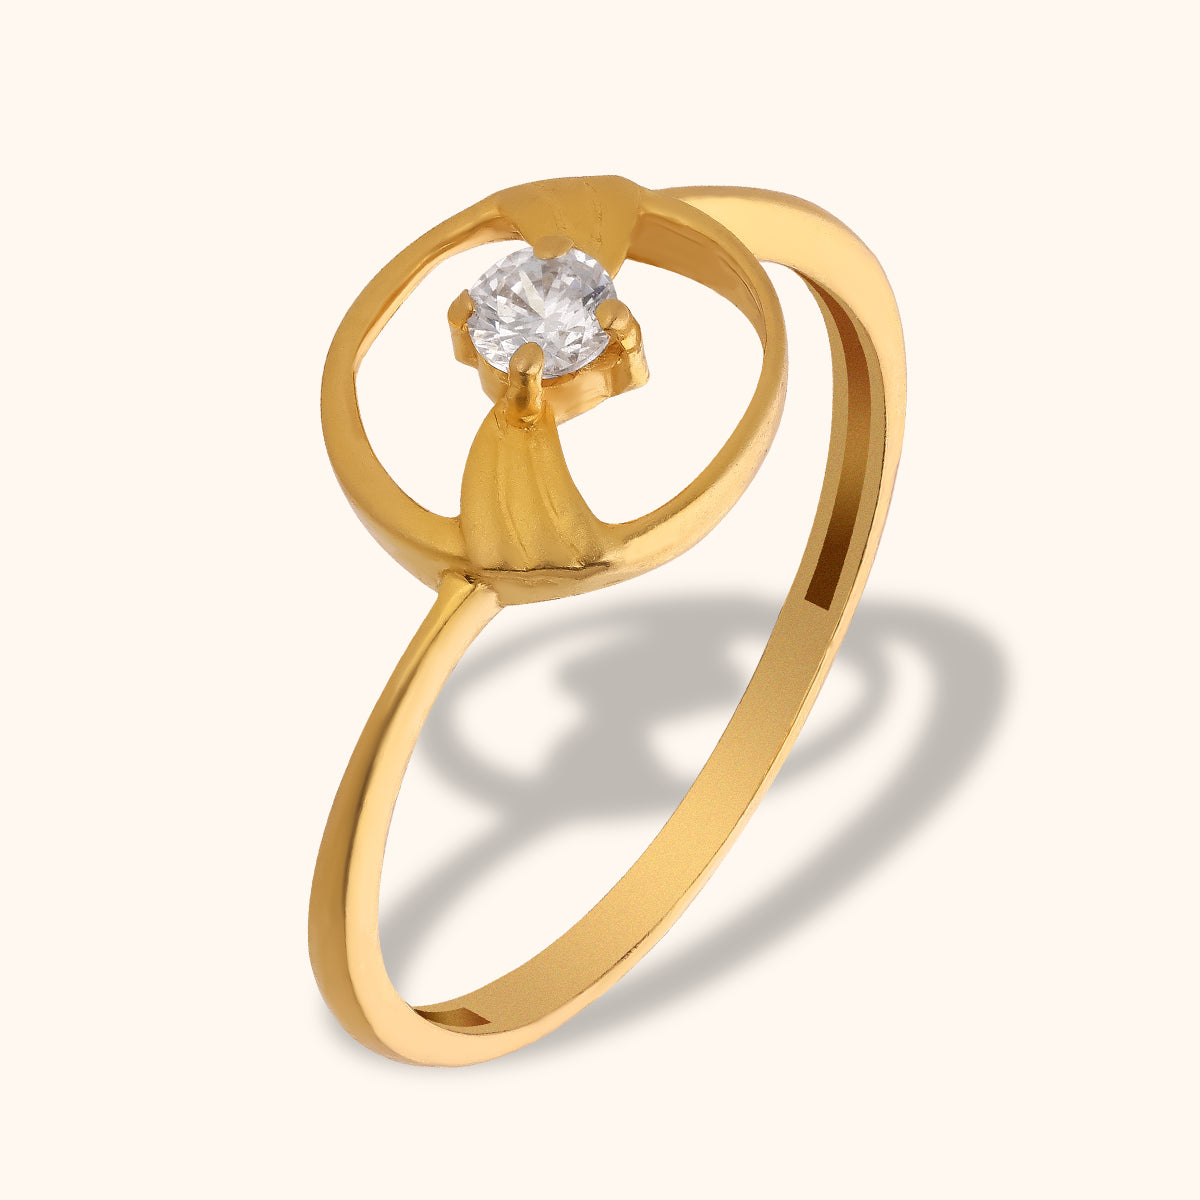 Exclusive 14KT Yellow Gold and American Diamond Ring for Special Occasion